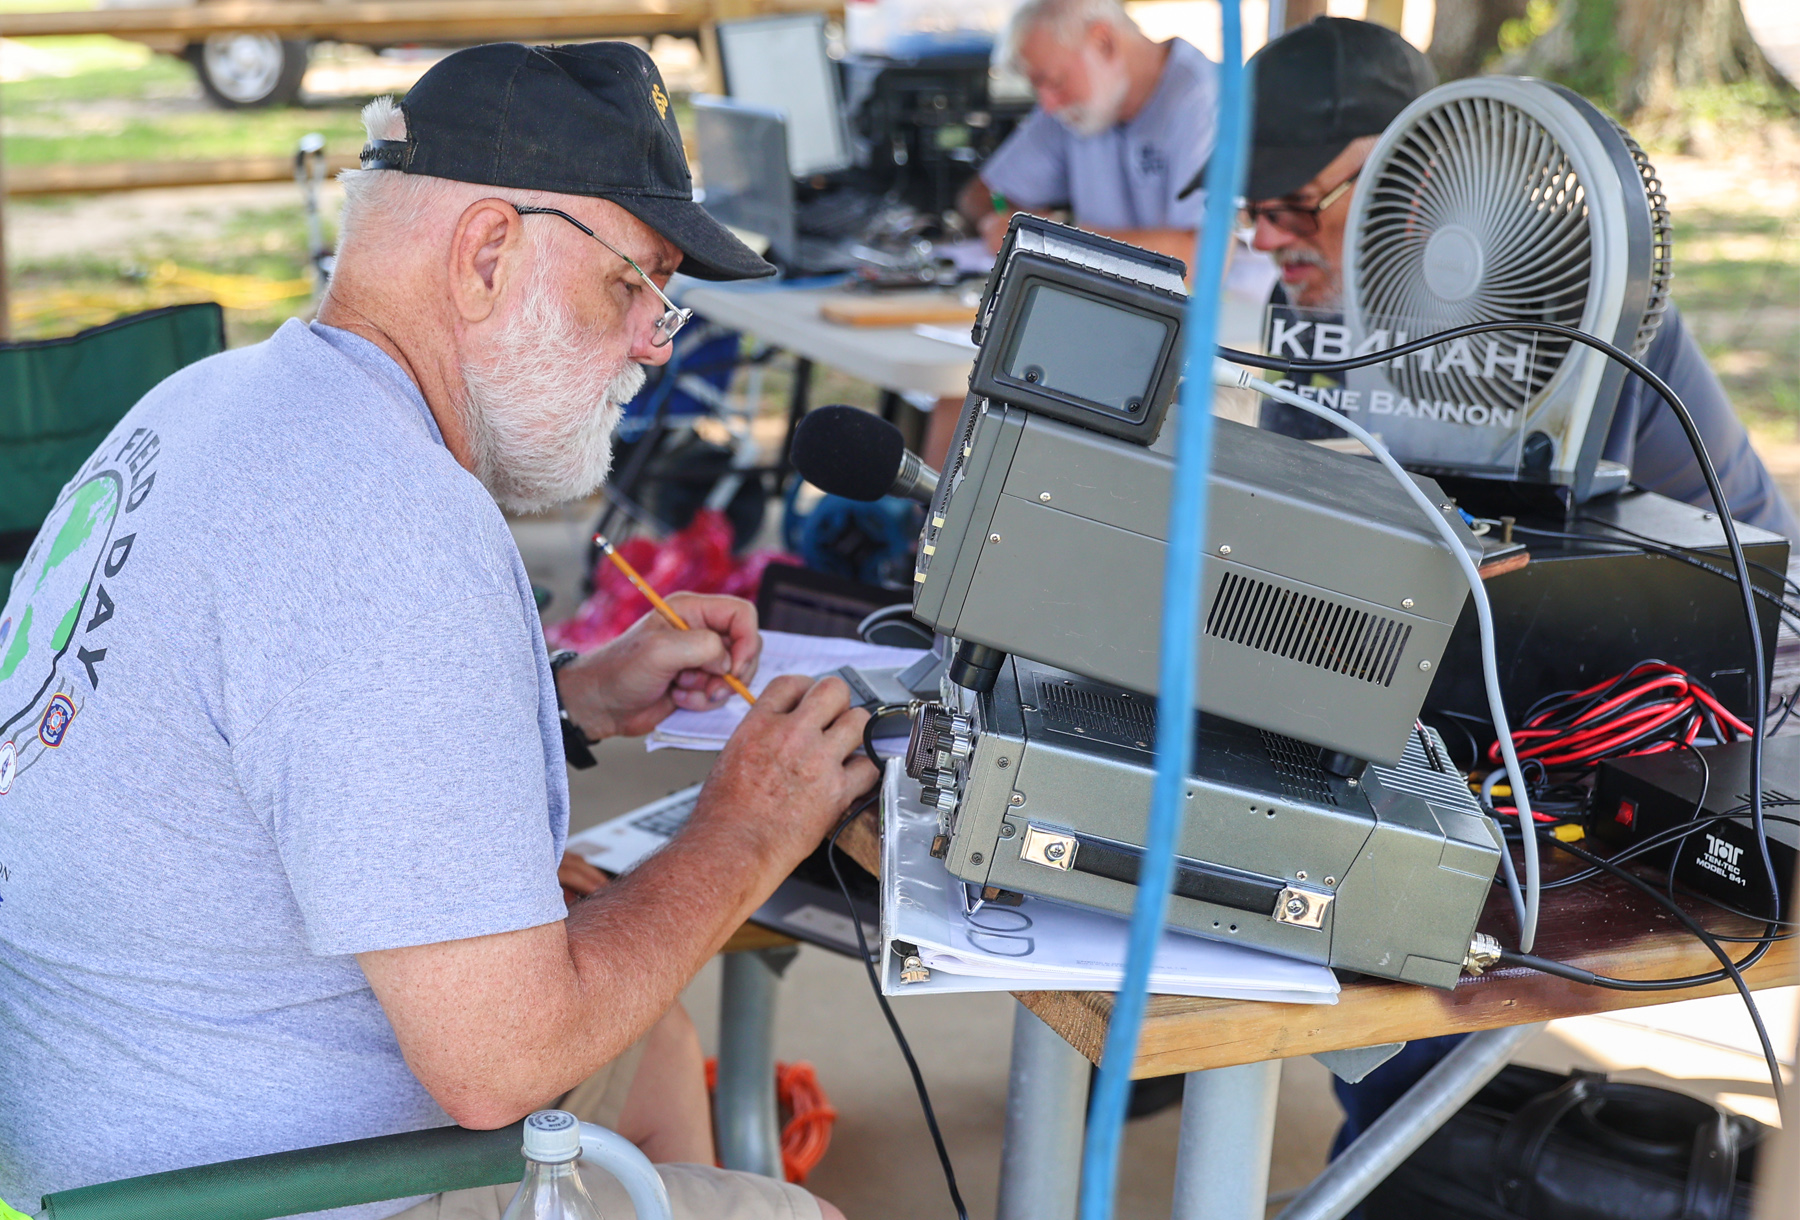 Local Hams Take To The Airwaves For Amateur Radio Field Day, Practicing Emergency Communications NorthEscambia photo